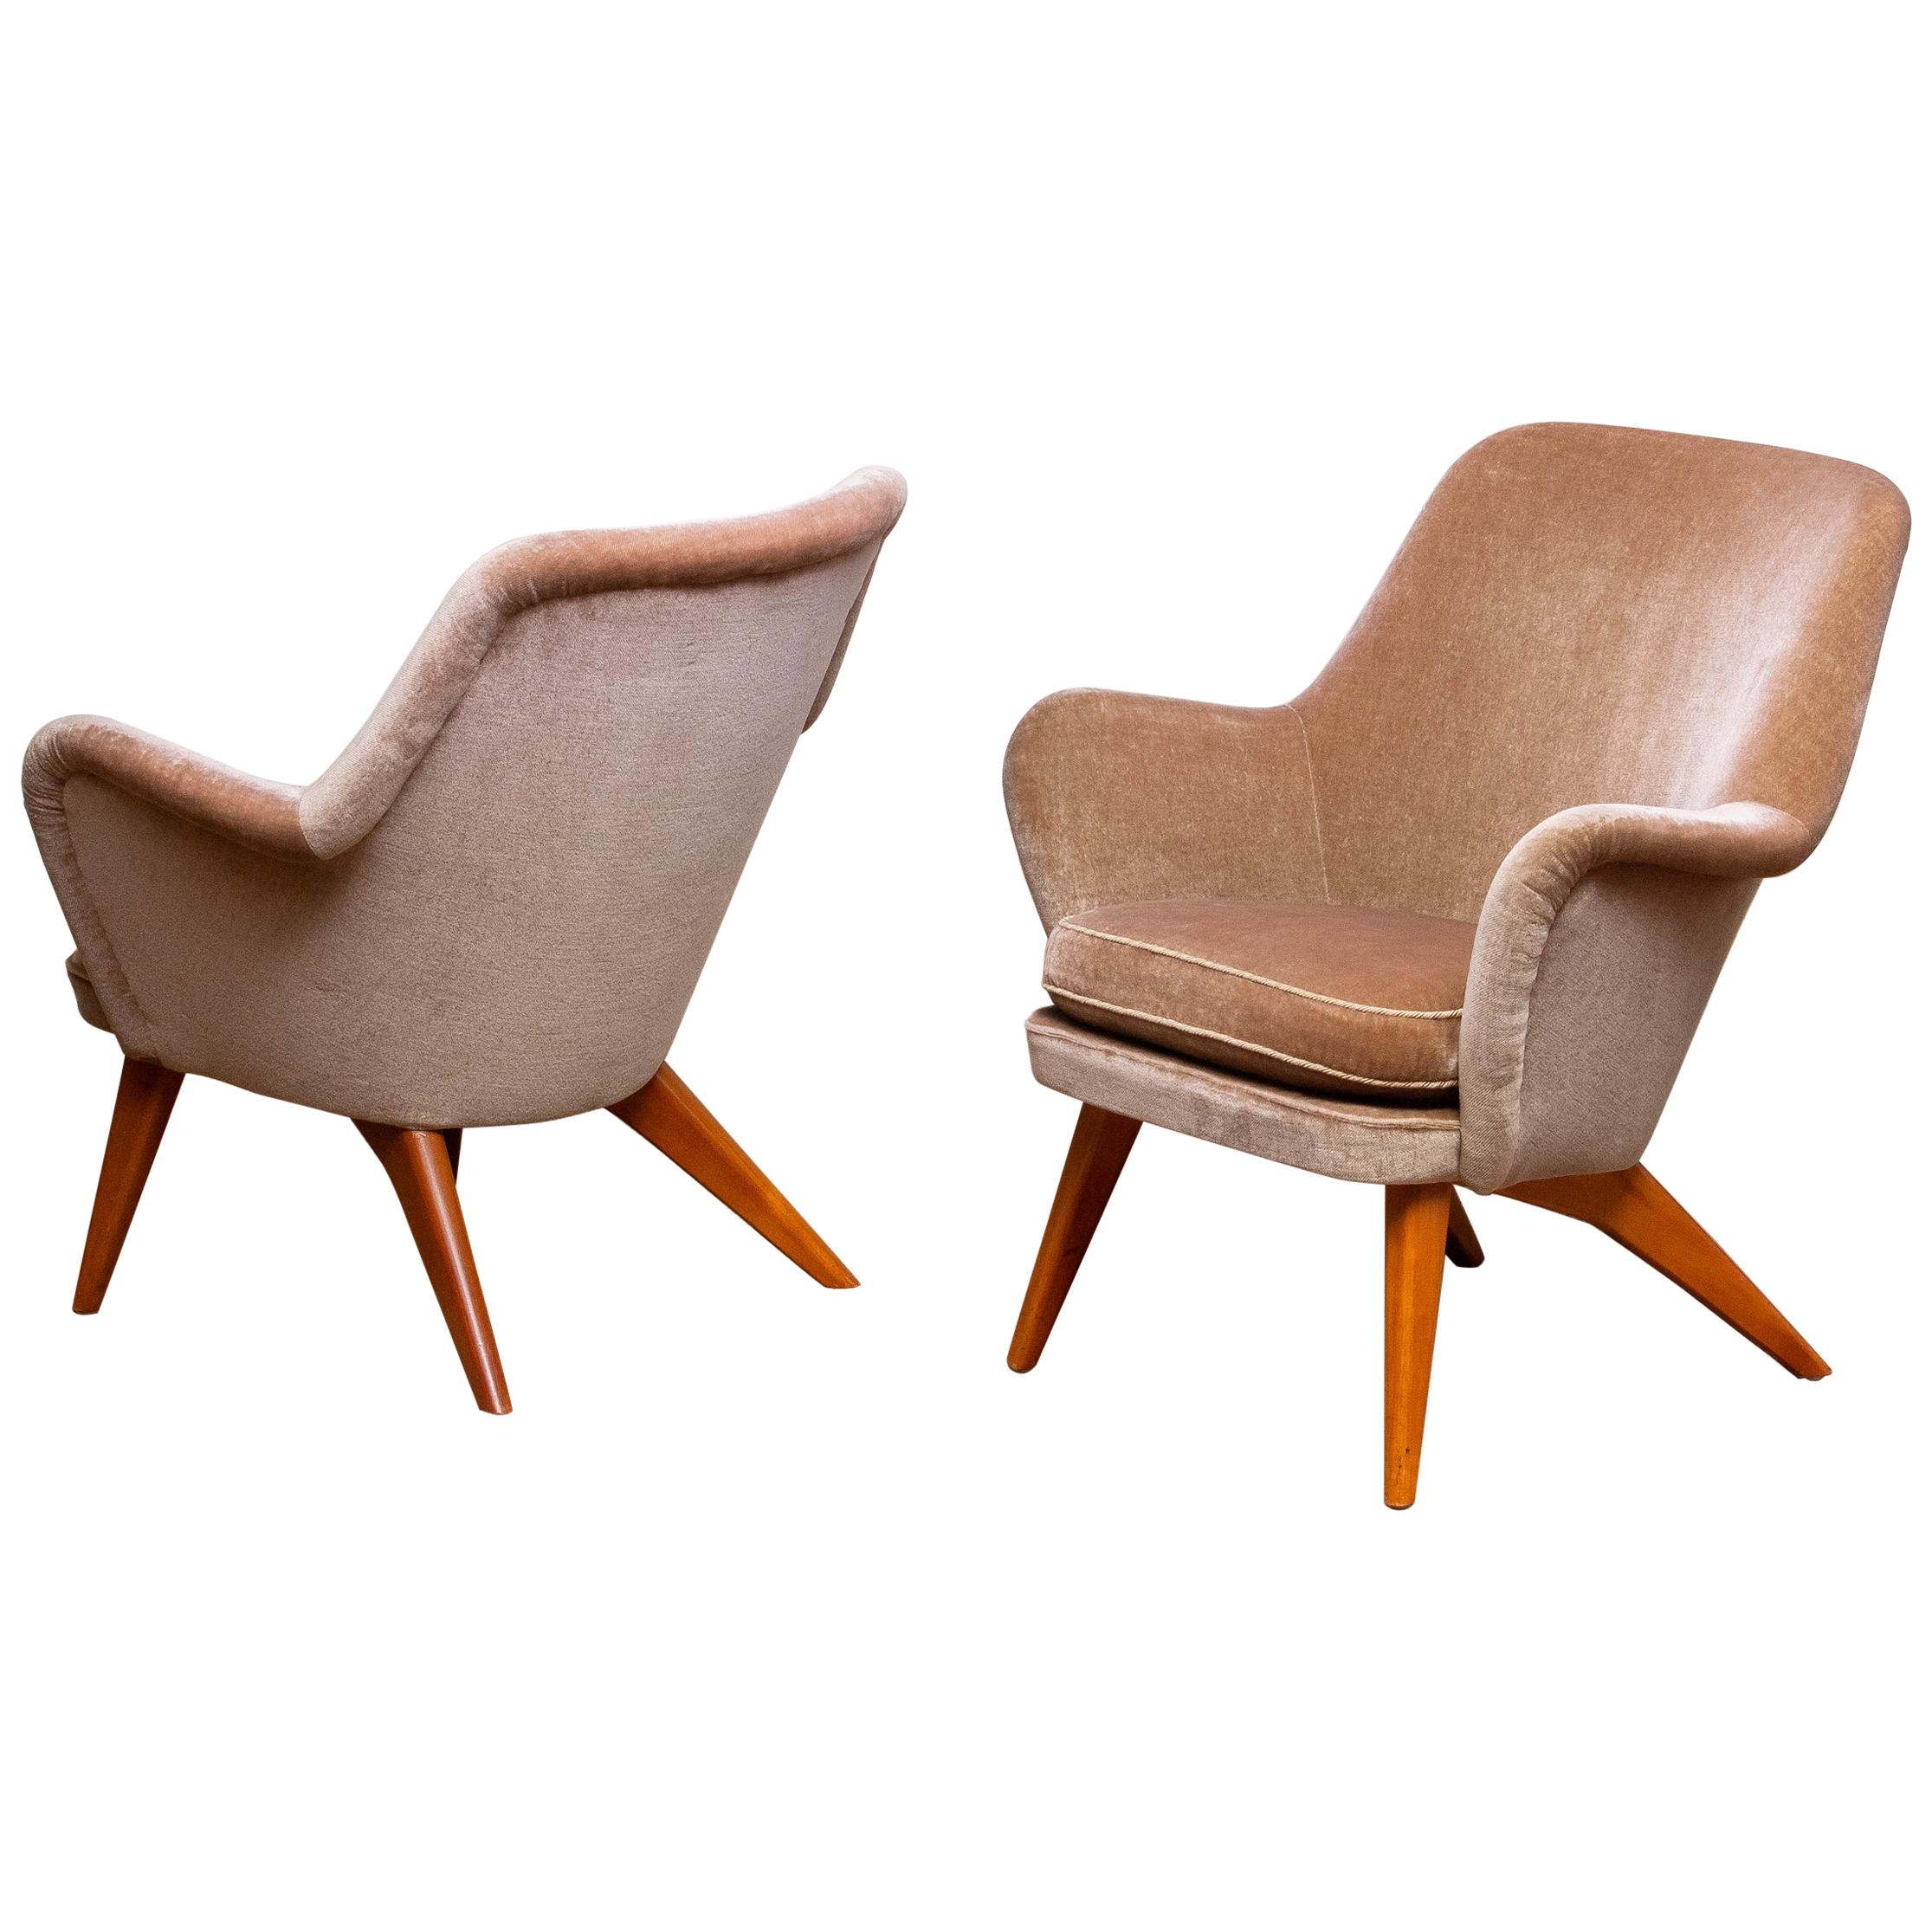 Finnish 1950s a Pair of Pedro Chairs by Carl Gustav Hiort af Ornäs, Finland